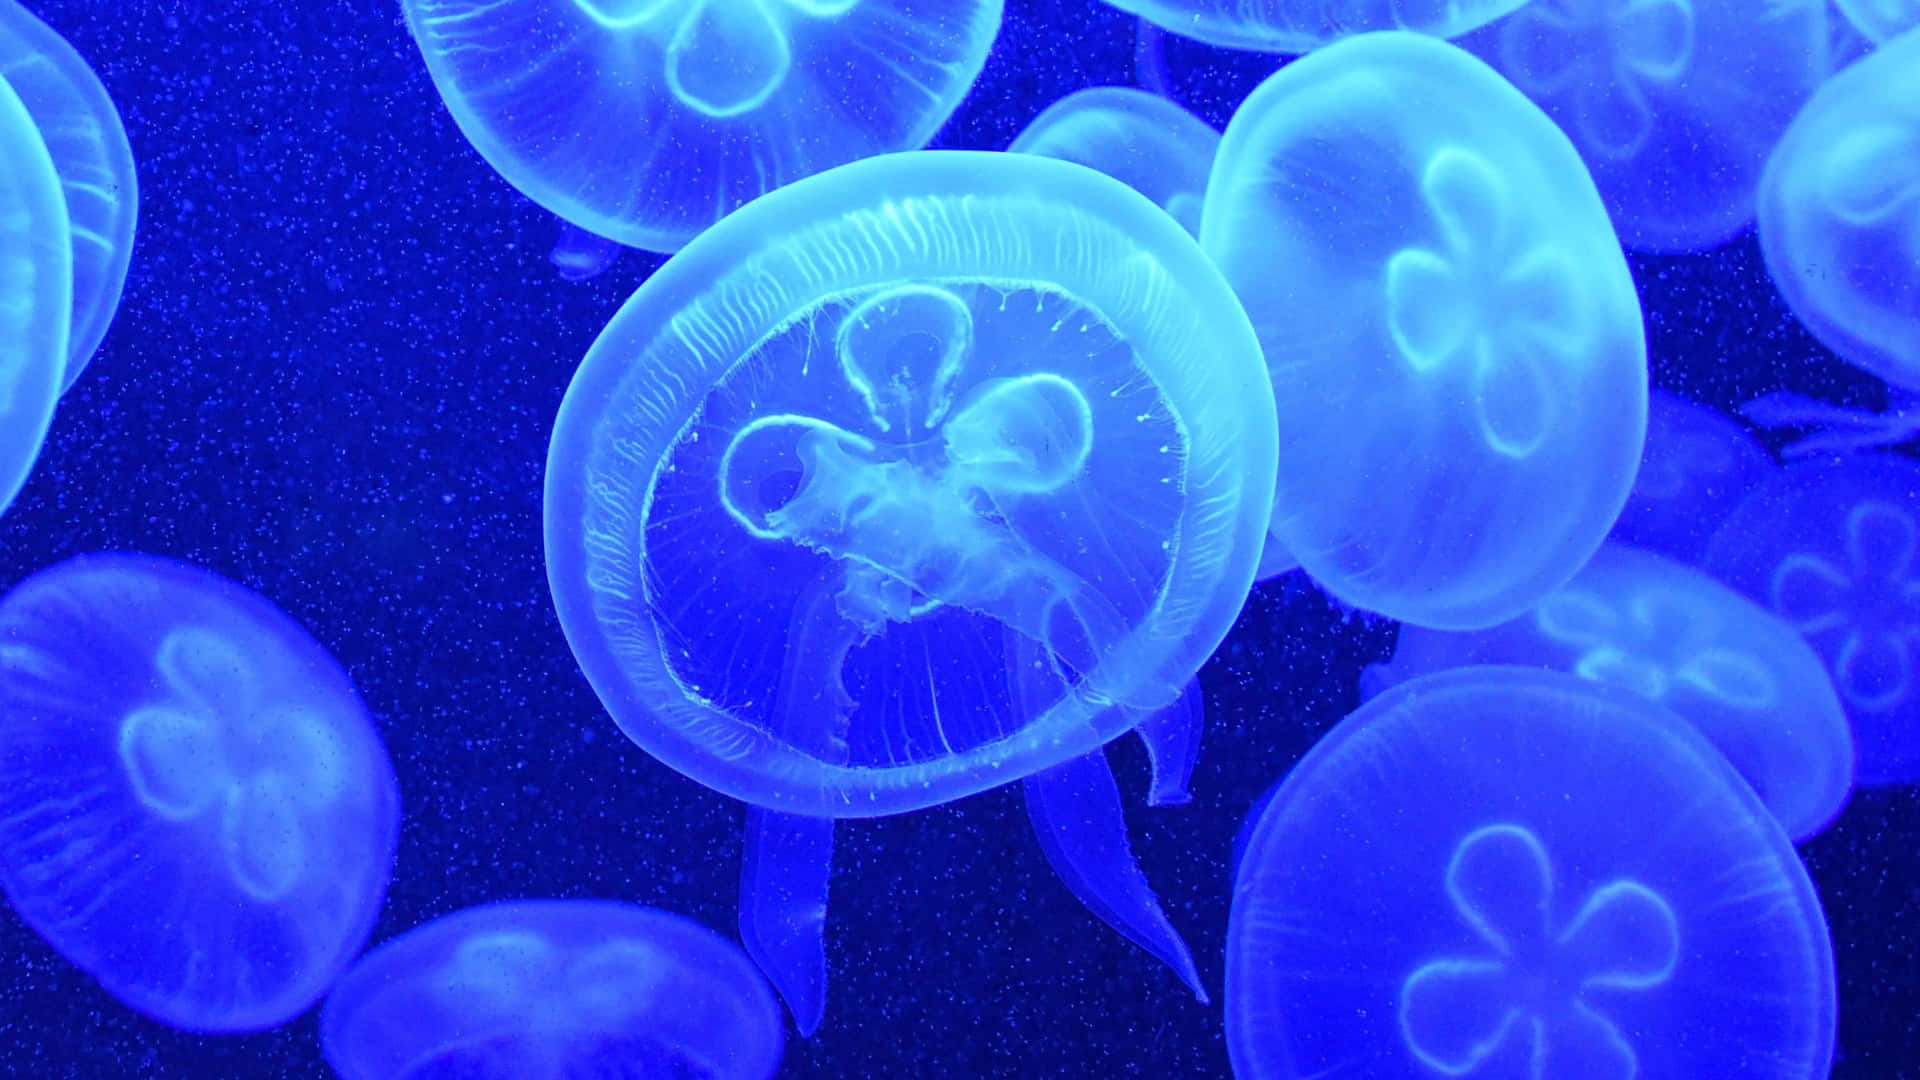 Enjoy the ethereal beauty of the 4K Jellyfish Wallpaper